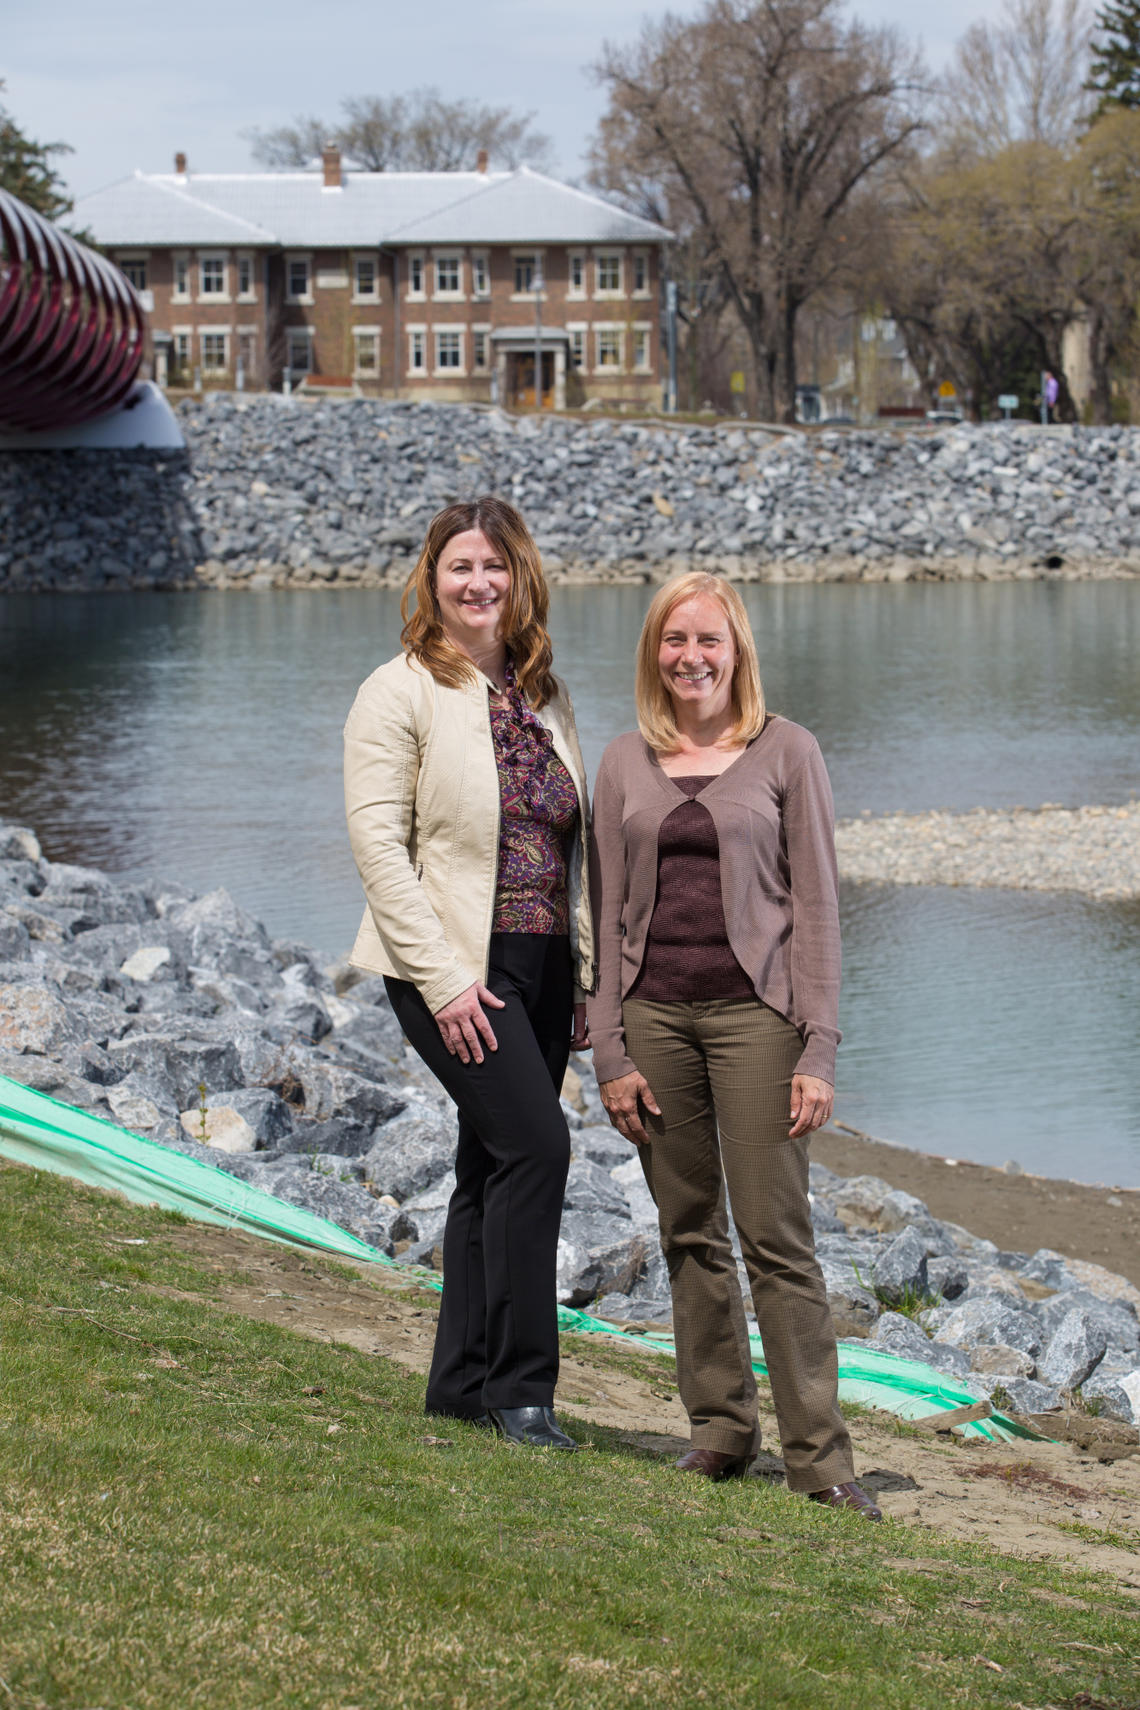 Tracey Moll, manager of Strategic Services in The City of Calgary's Environmental and Safety Management section, and Werklund doctoral candidate Faye Bres are working together to study management practices and lessons learned from the flood of 2013. 